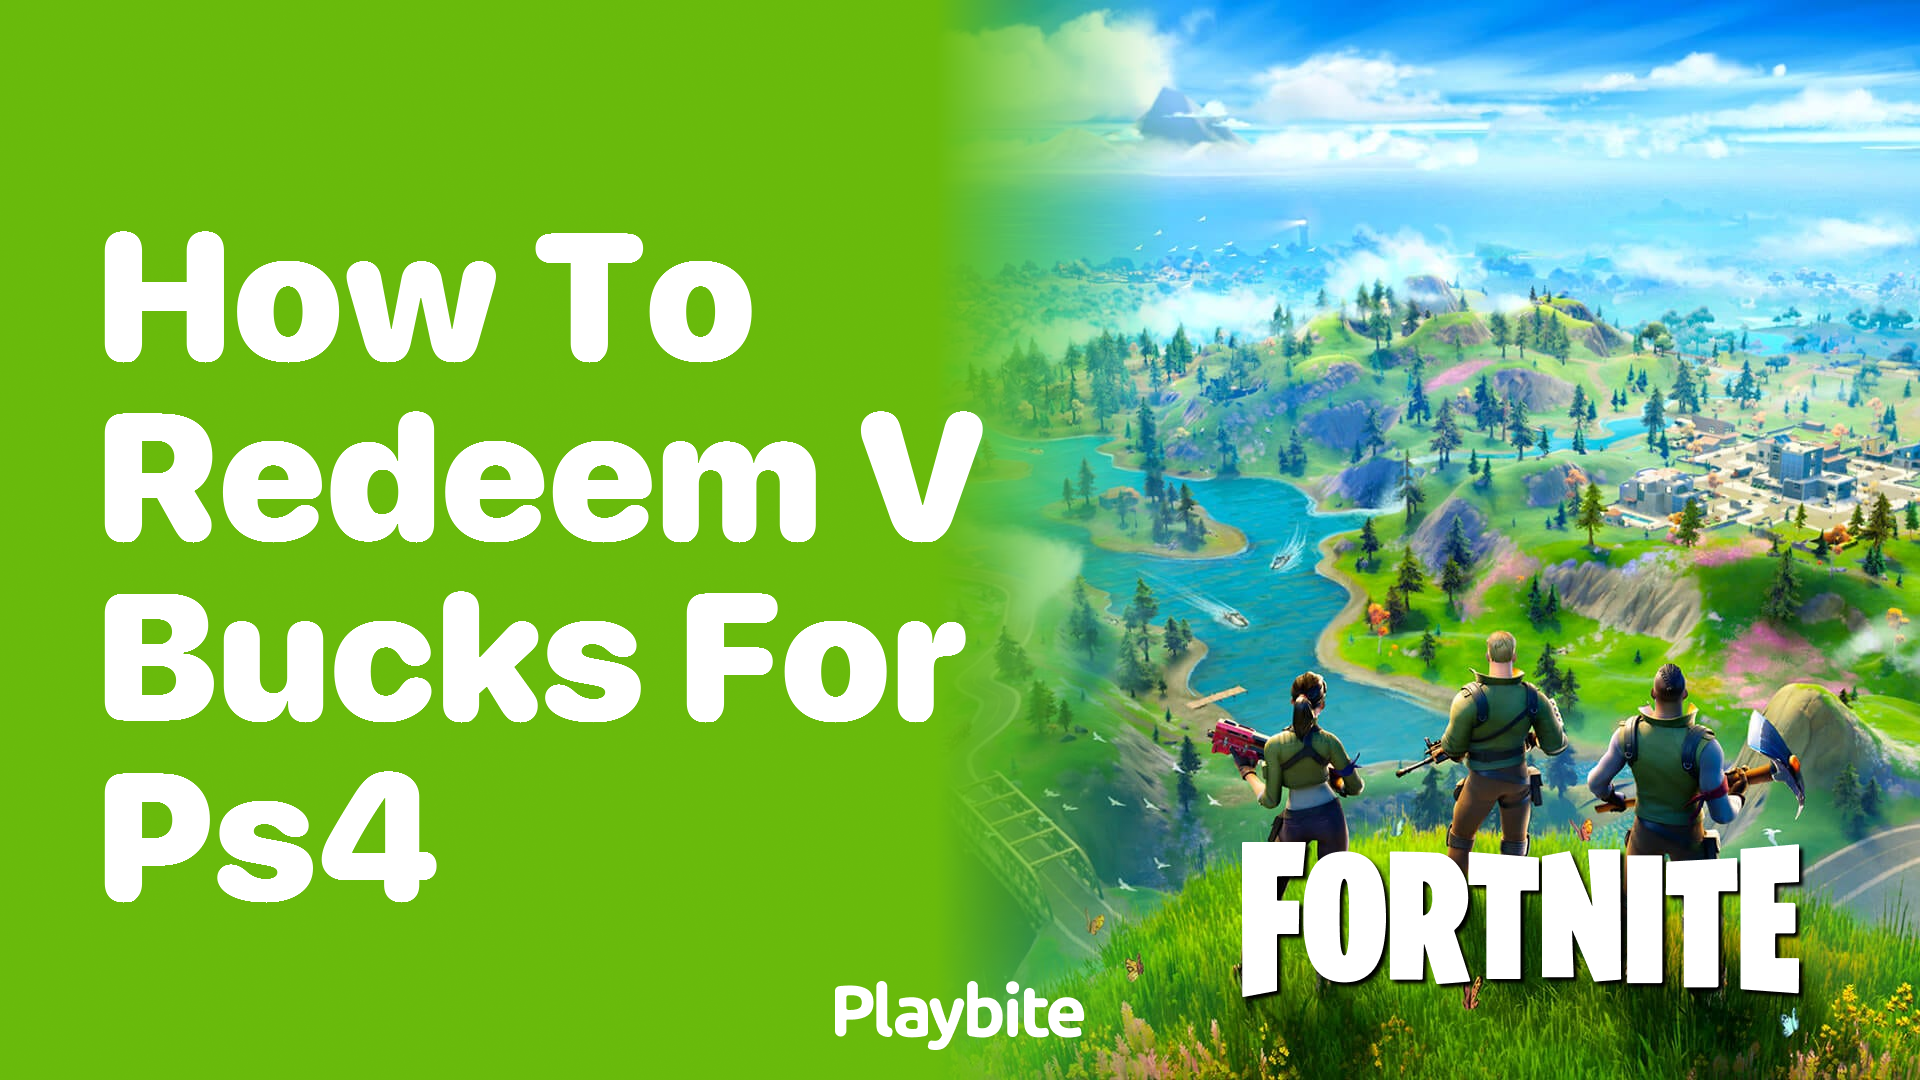 How to Redeem V-Bucks for PS4: A Quick Guide